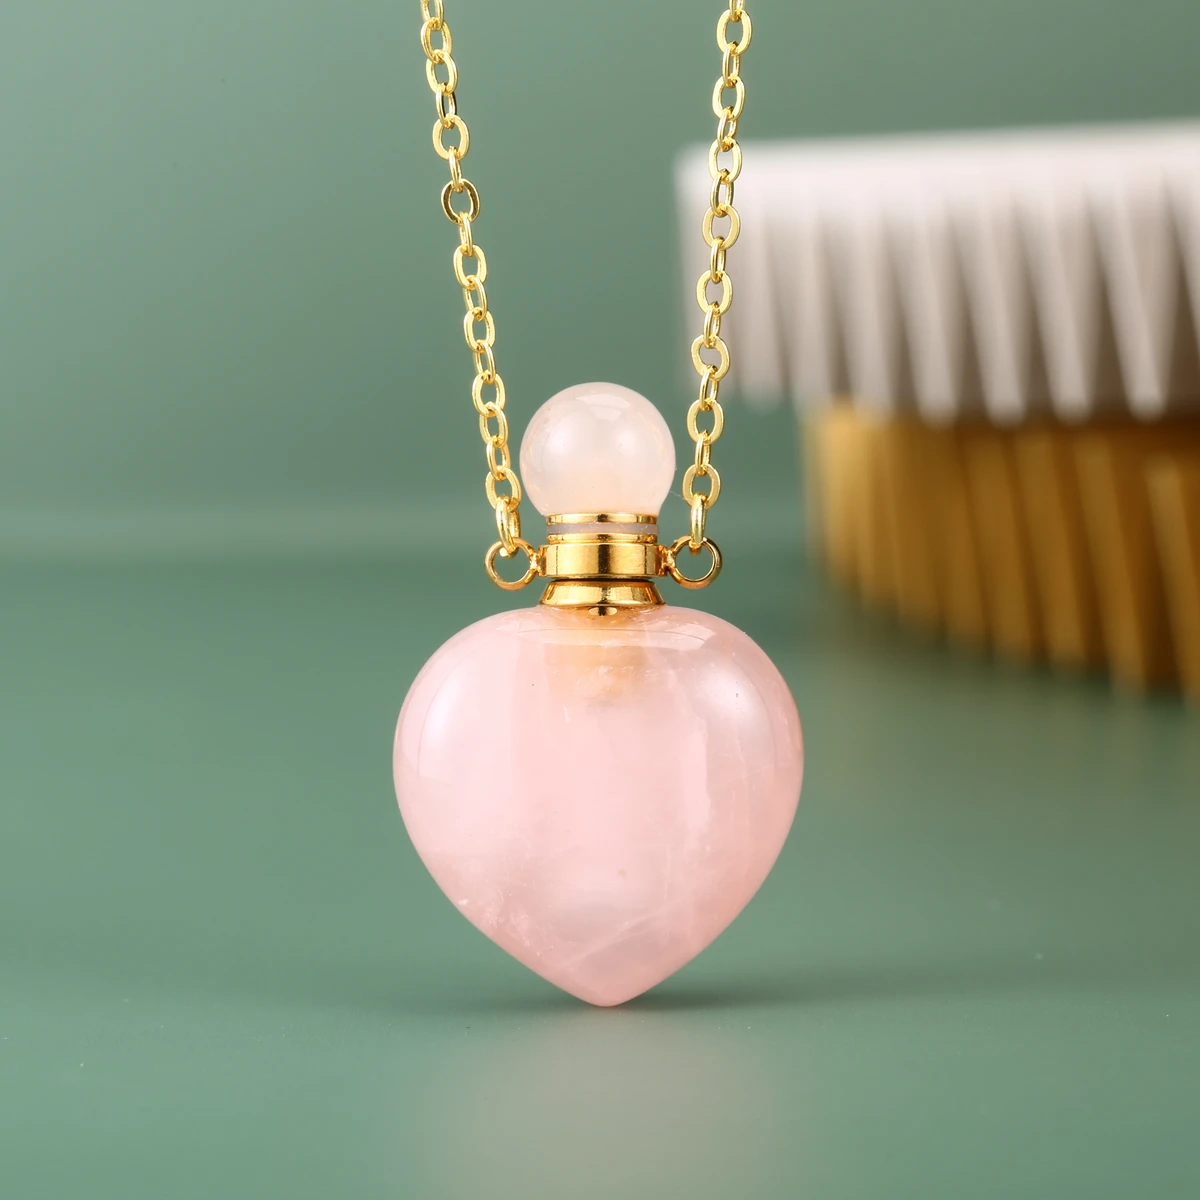 rose bloom energy of heart shape healing natural crystals stone pendant necklace essential Oil perfume bottle necklace jewellery, Different color is available